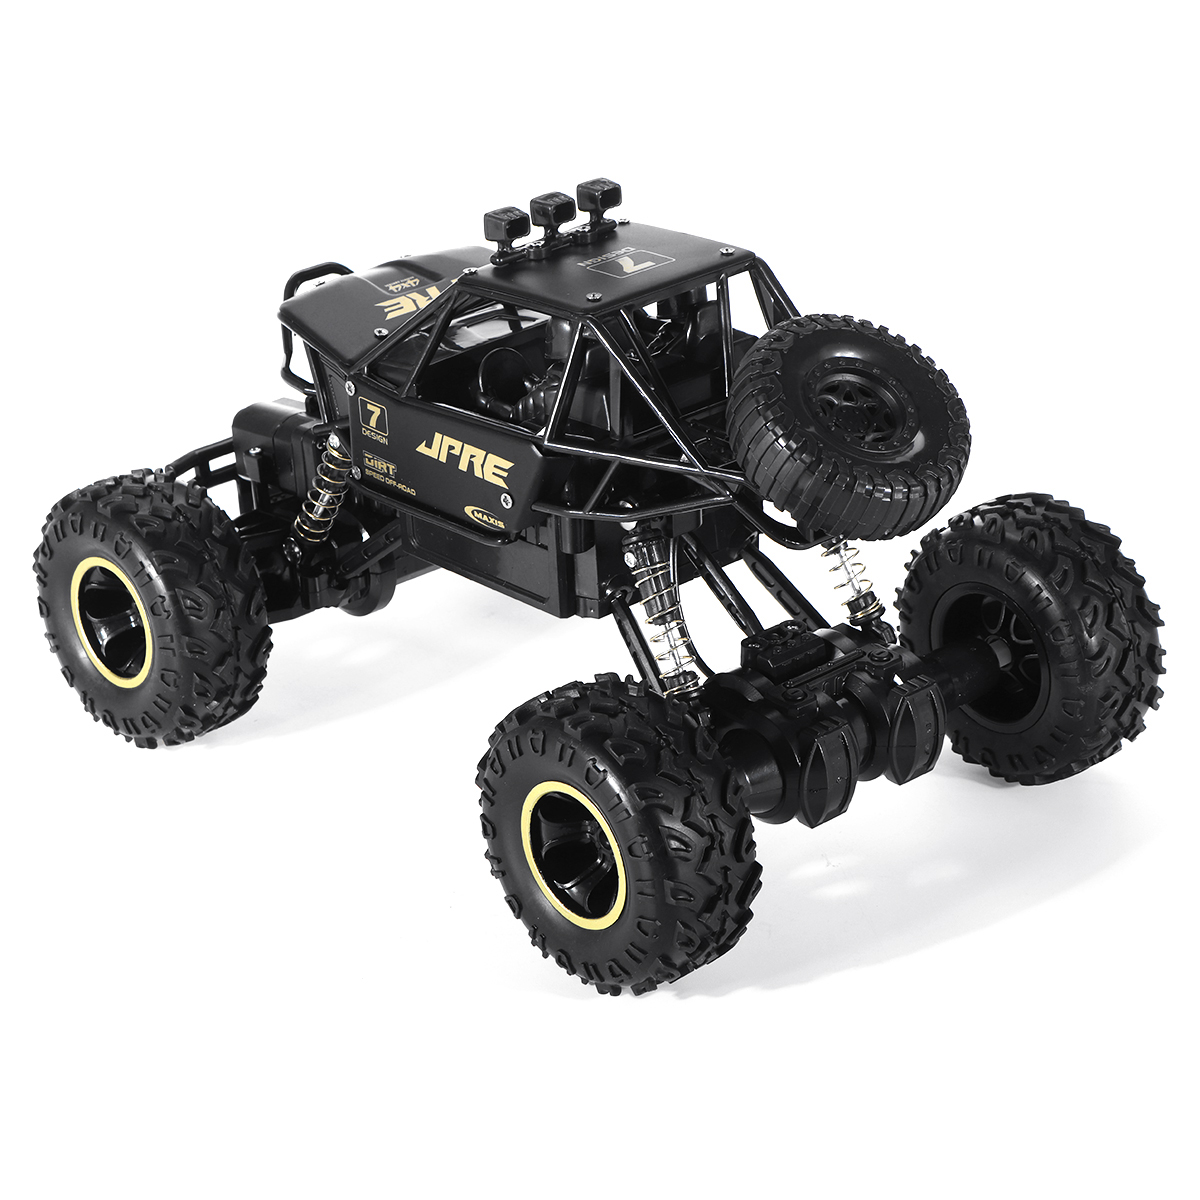 1:16 Alloy Remote Controls Car Monster Trucks, 4WD Climbing RC Cars Off Road, RC Crawler Toys for Boys Kids Gifts - image 10 of 11